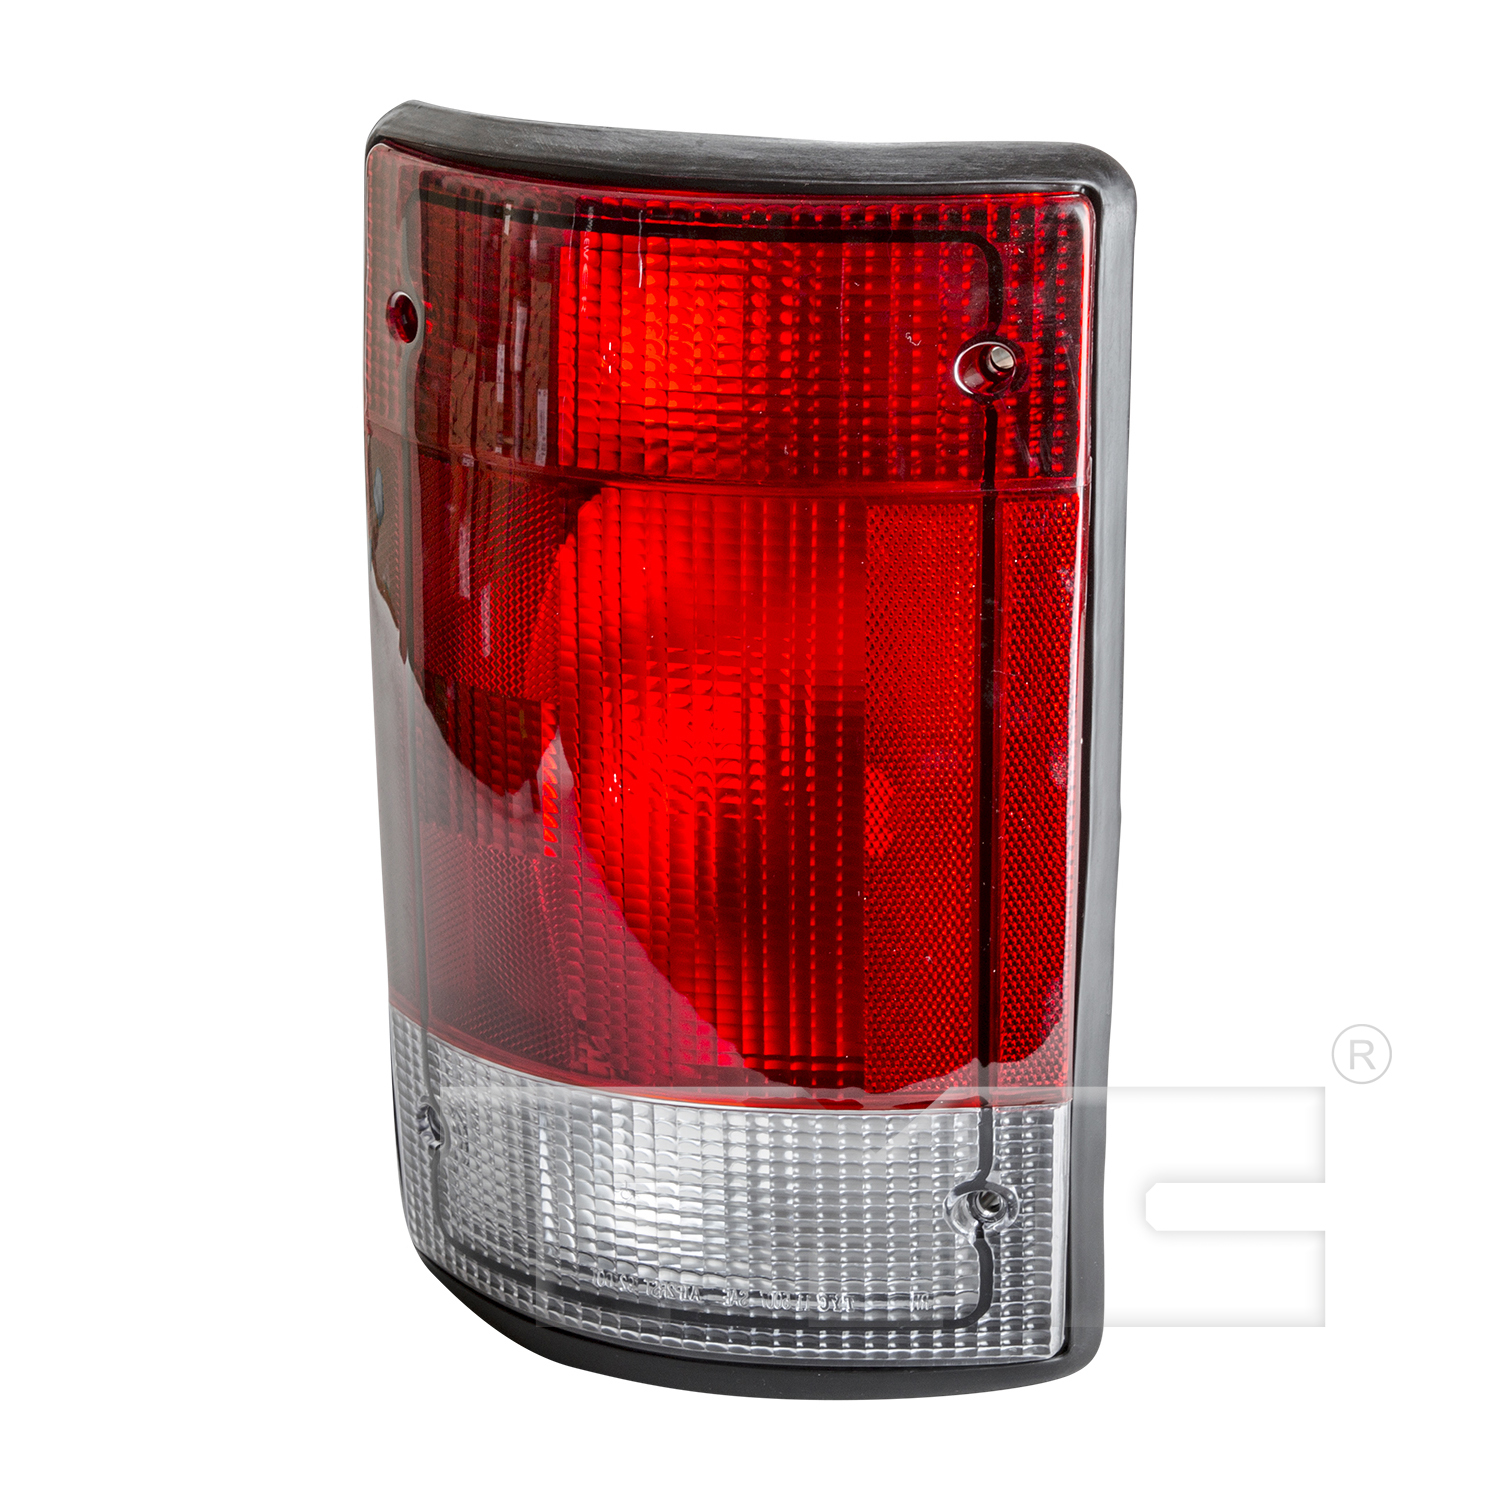 Aftermarket TAILLIGHTS for FORD - E-350 SUPER DUTY, E-350 SUPER DUTY,99-03,LT Taillamp assy